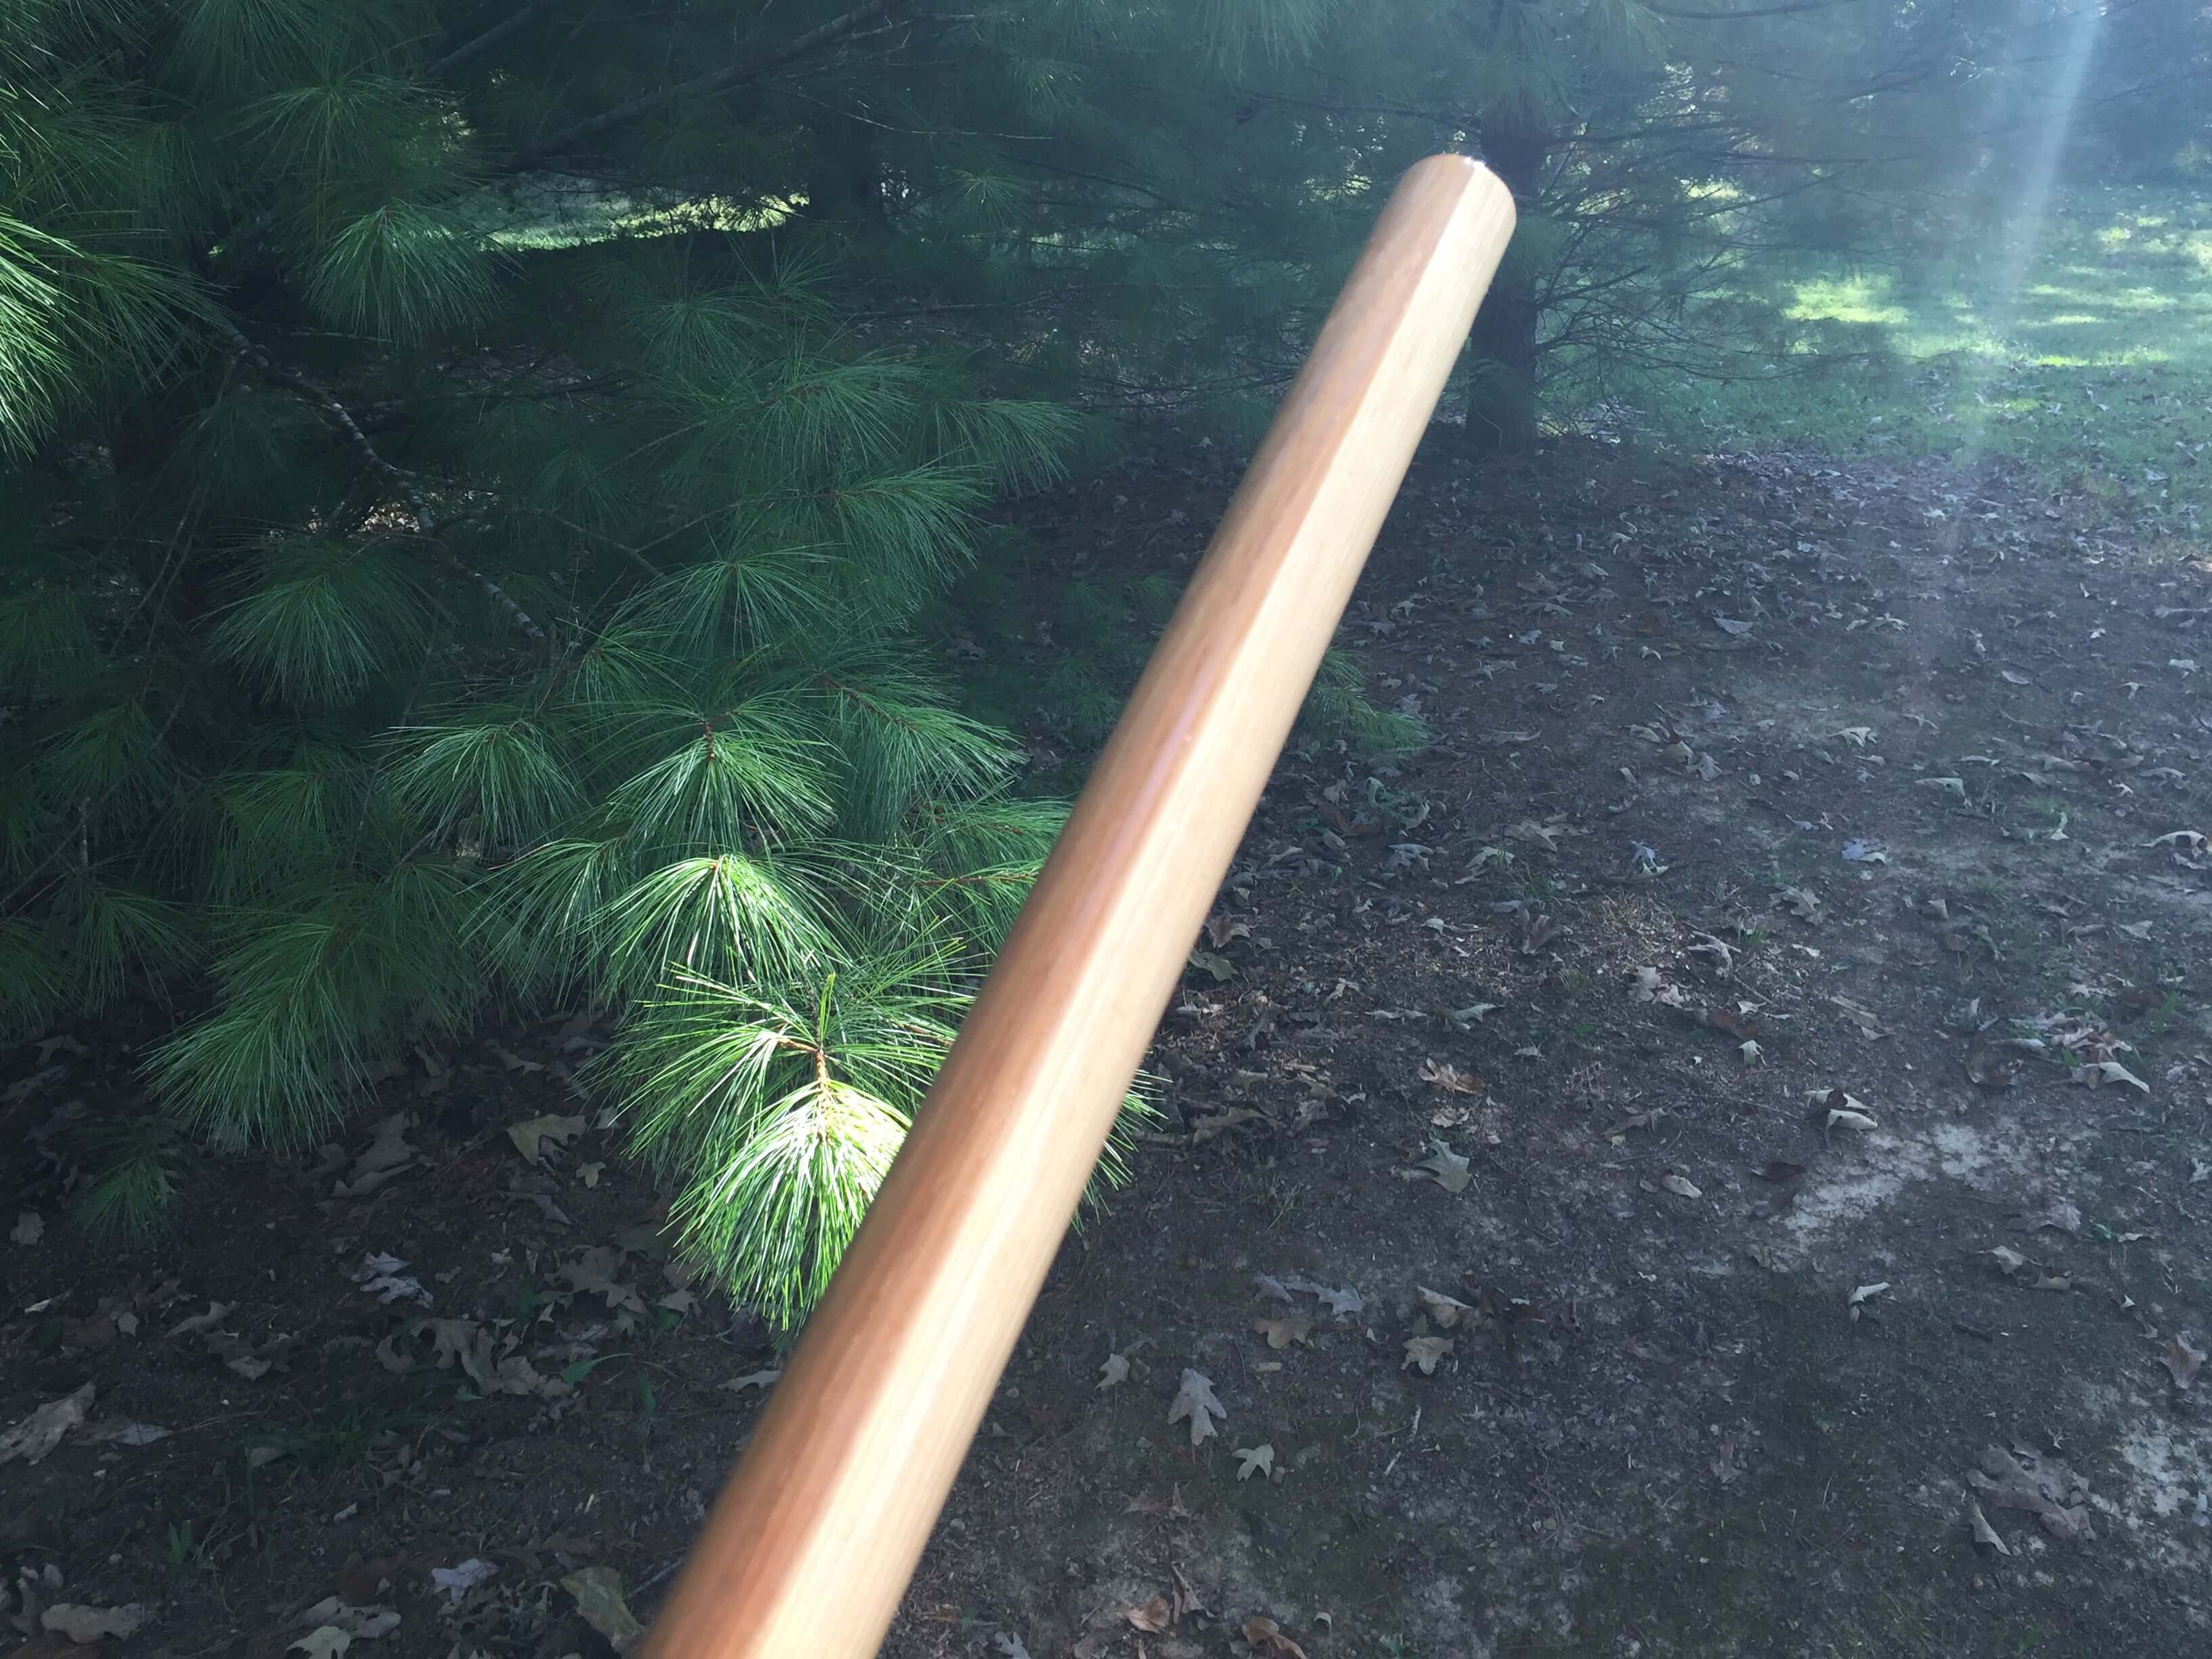 Extra heavy hickoy hardwood staff for hiking or martial arts